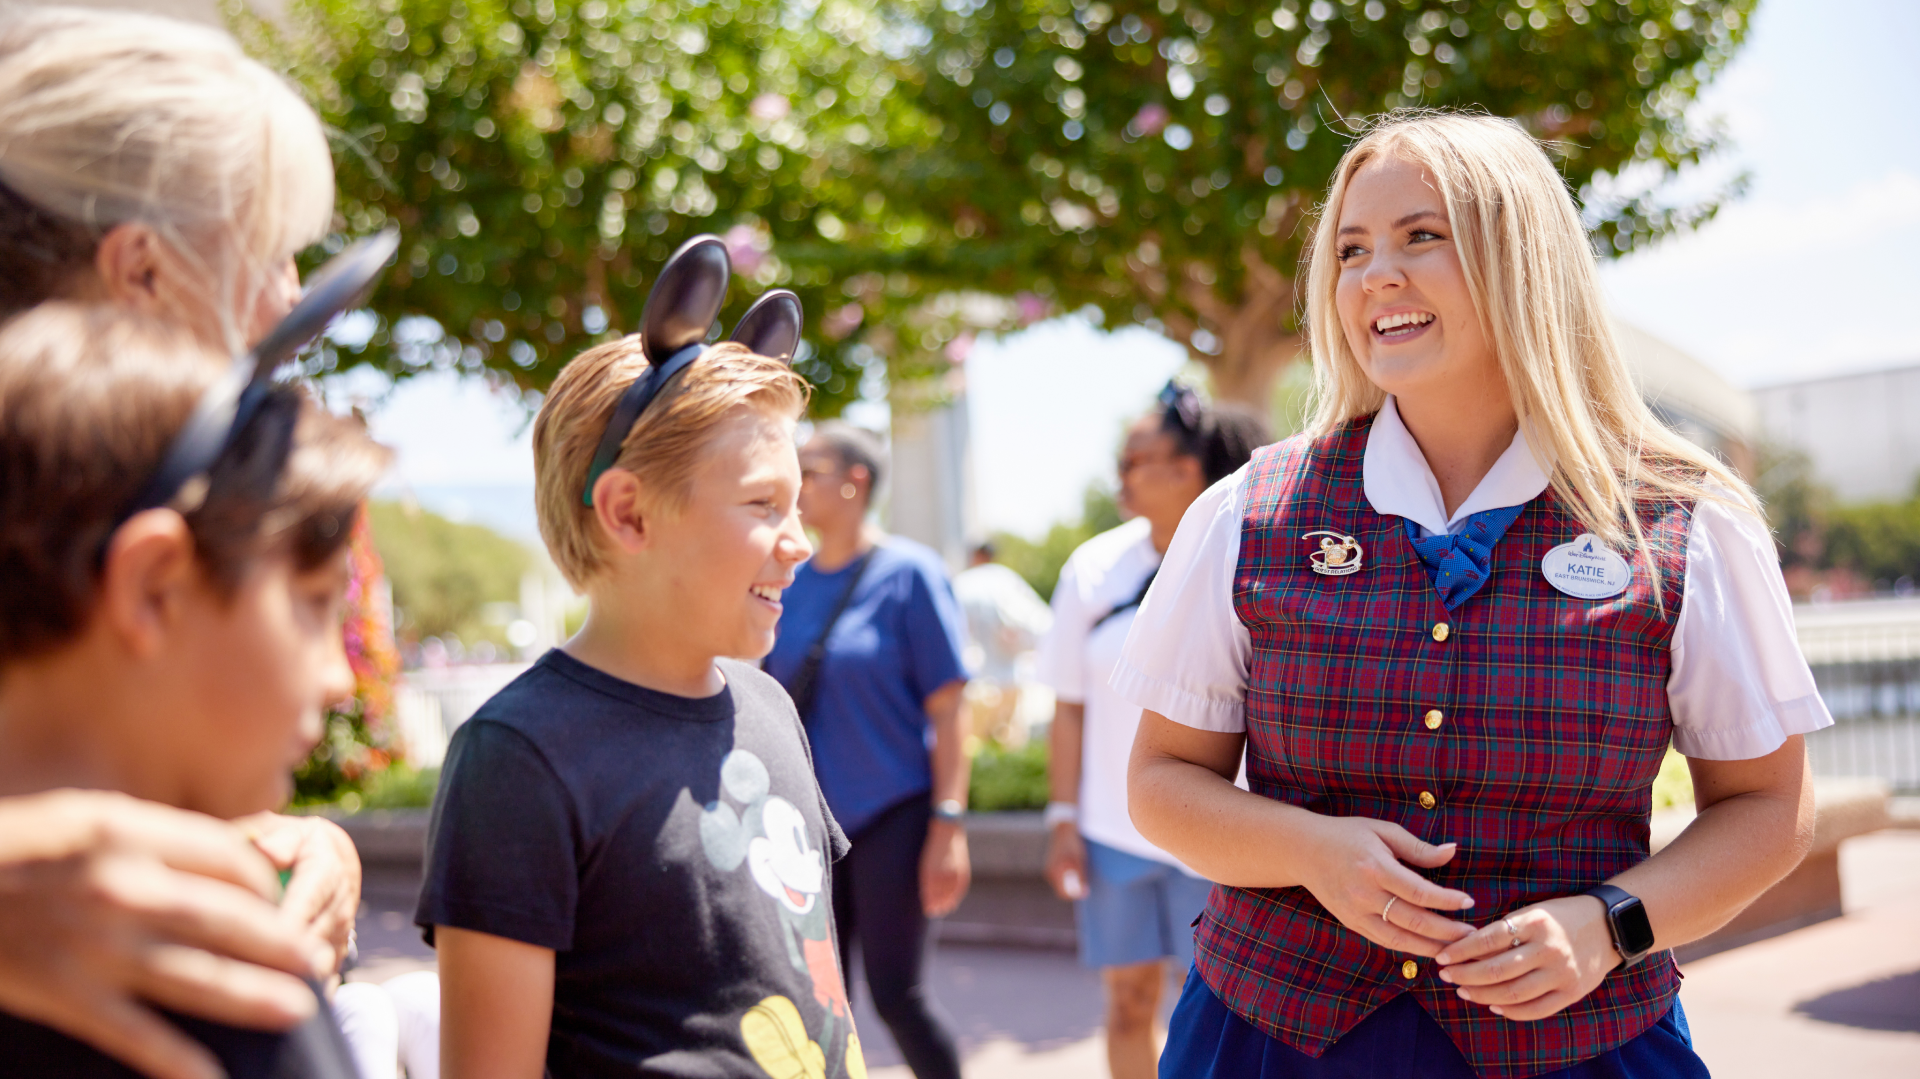 Disney Cast Member smiling while helping guests